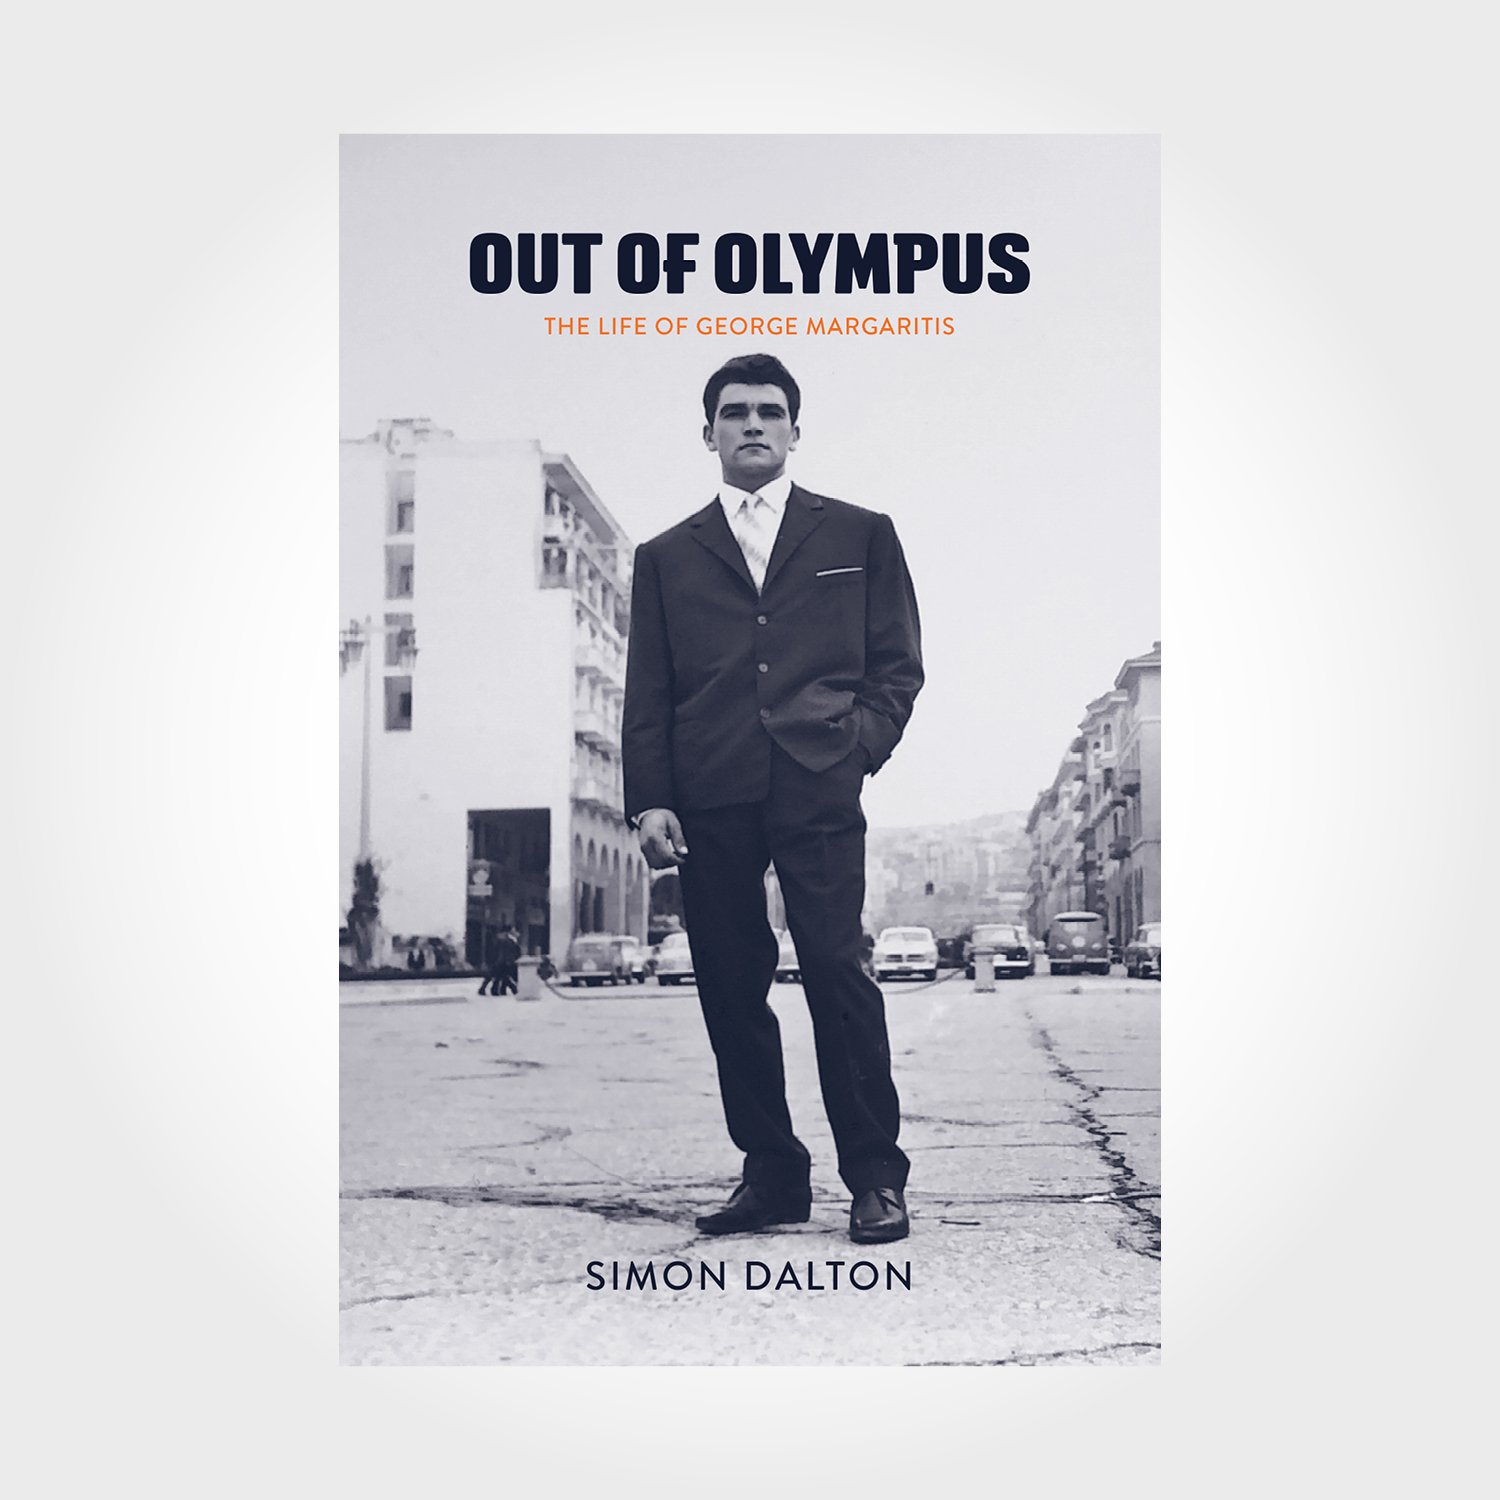 Out of Olympus